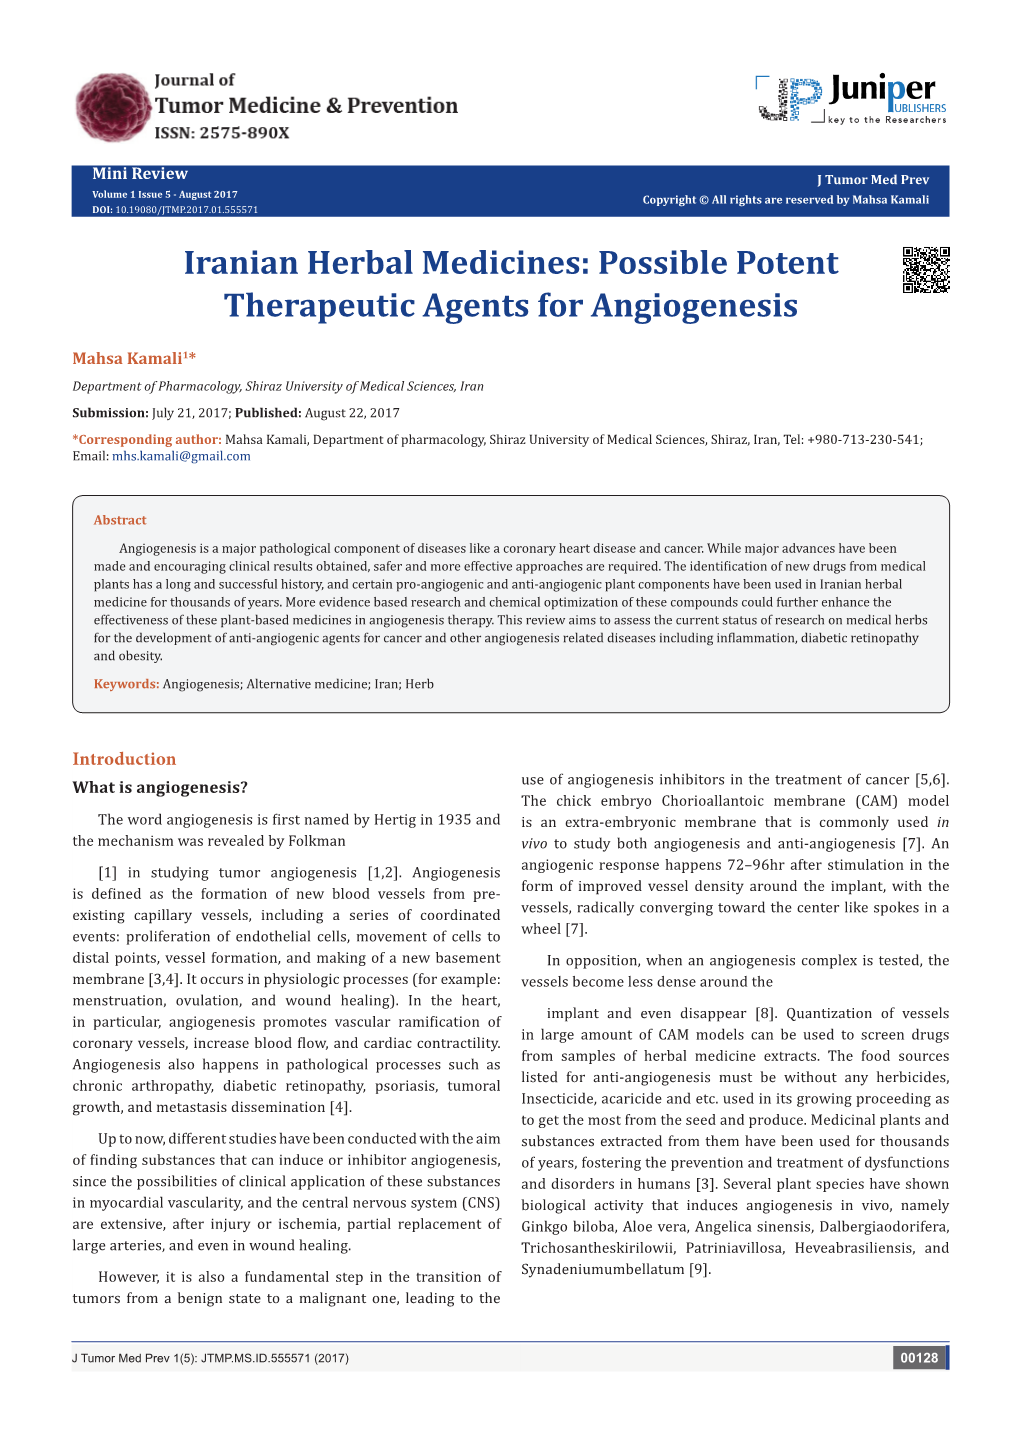 Iranian Herbal Medicines: Possible Potent Therapeutic Agents for Angiogenesis